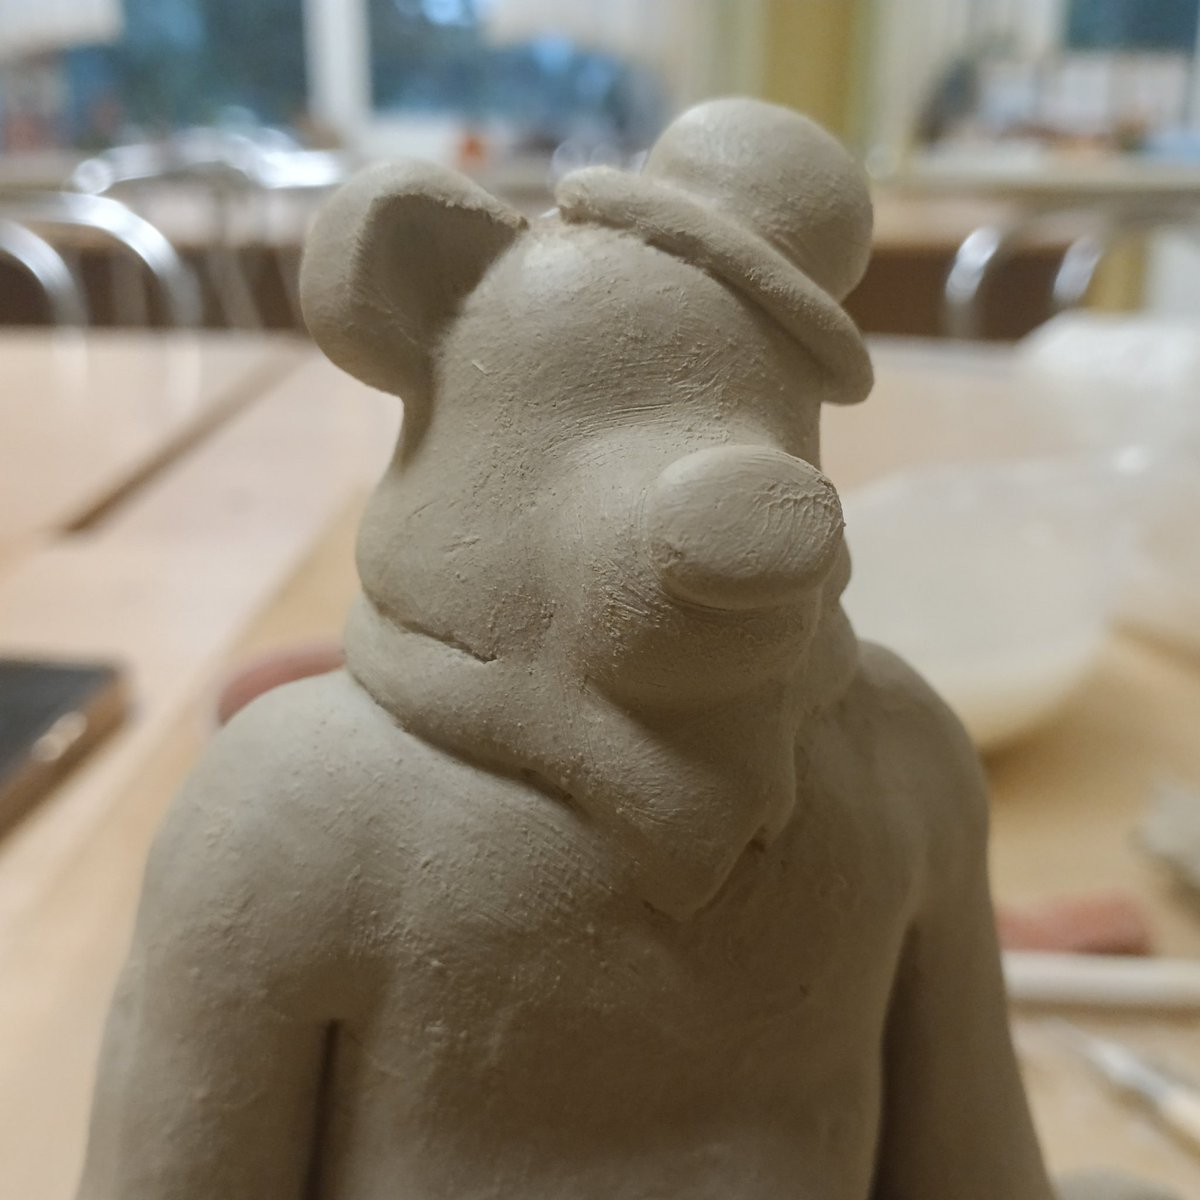 Now it will be Angus🐻👓

#furry #nitw #nightinthewoods #ceramic #clay